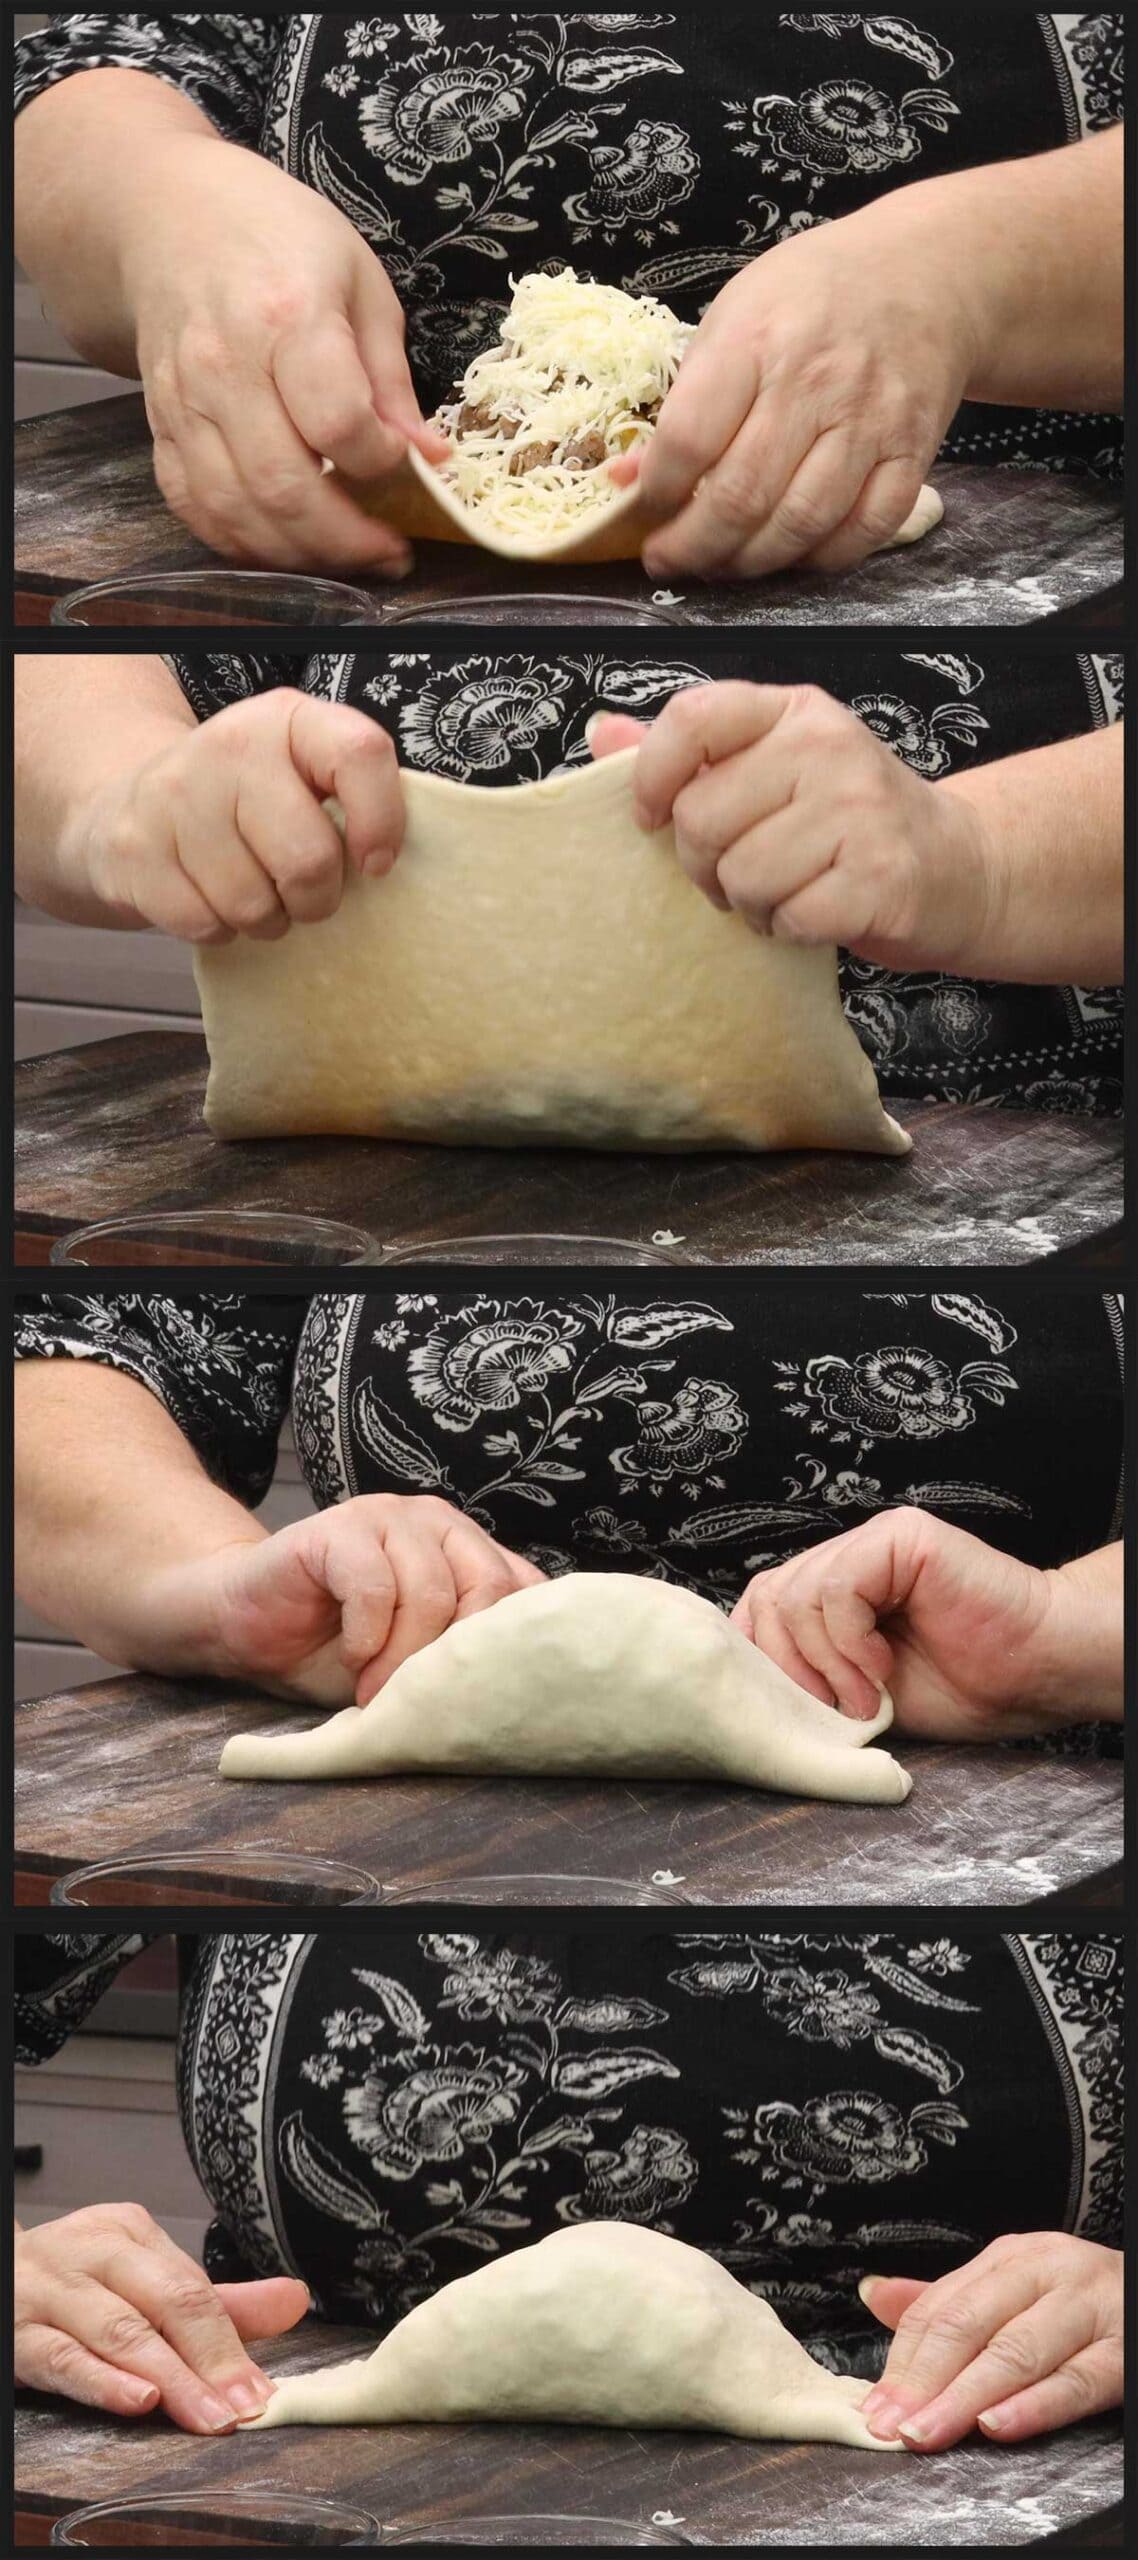 folding the dough over the calzone fillings and sealing the edges.